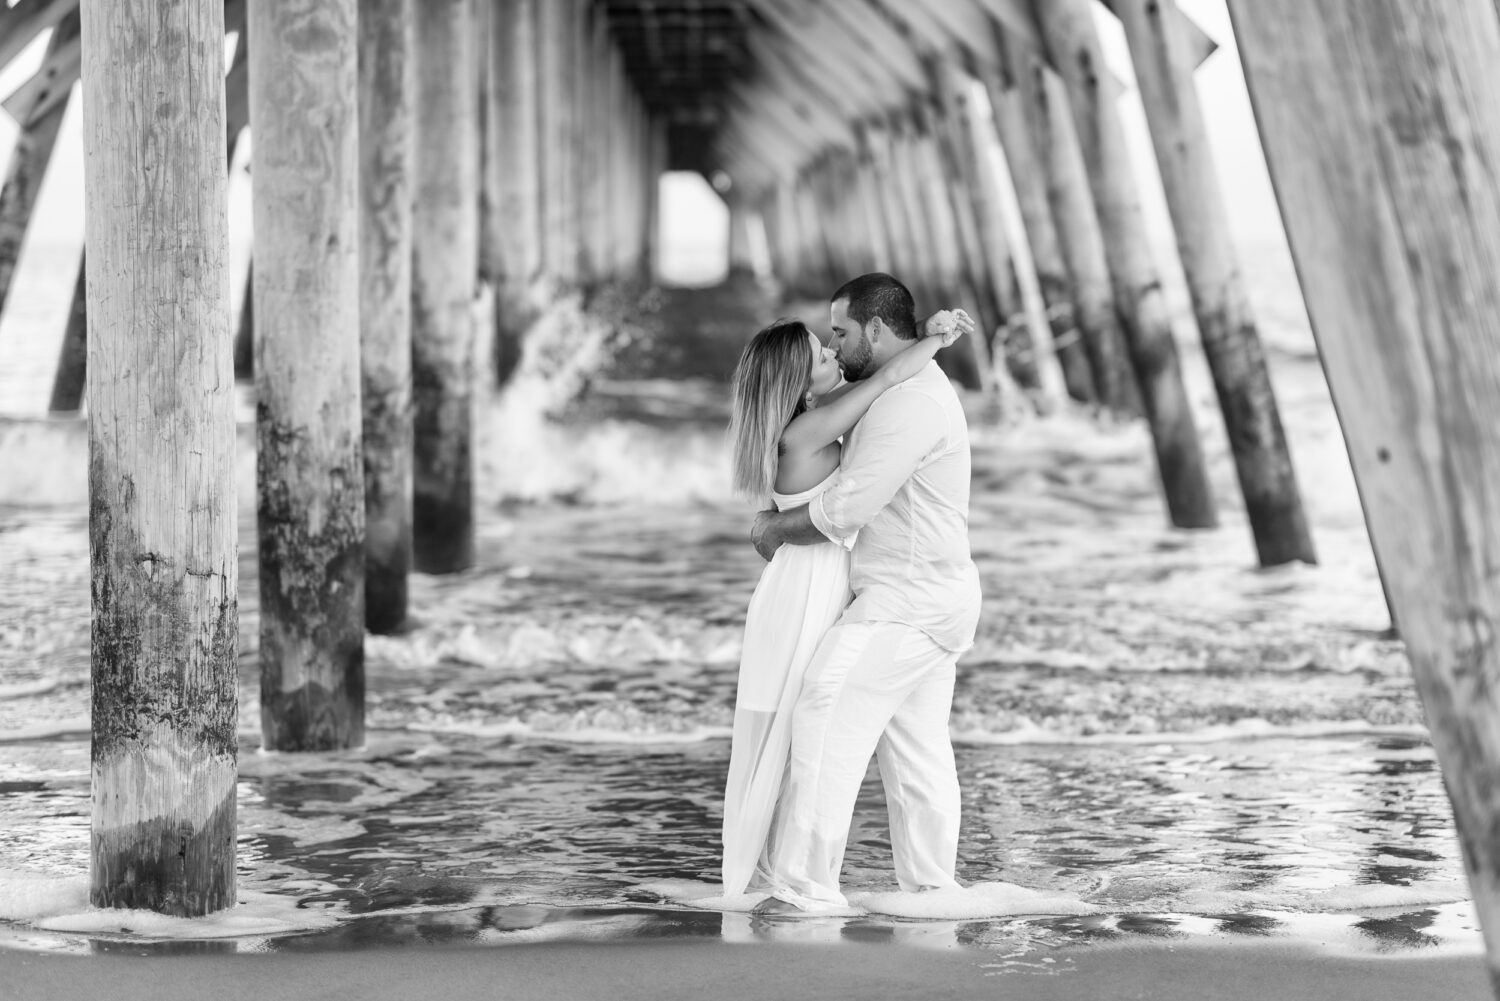 Kiss under the Park pier with waves splashing in the background - Myrtle Beach State Park